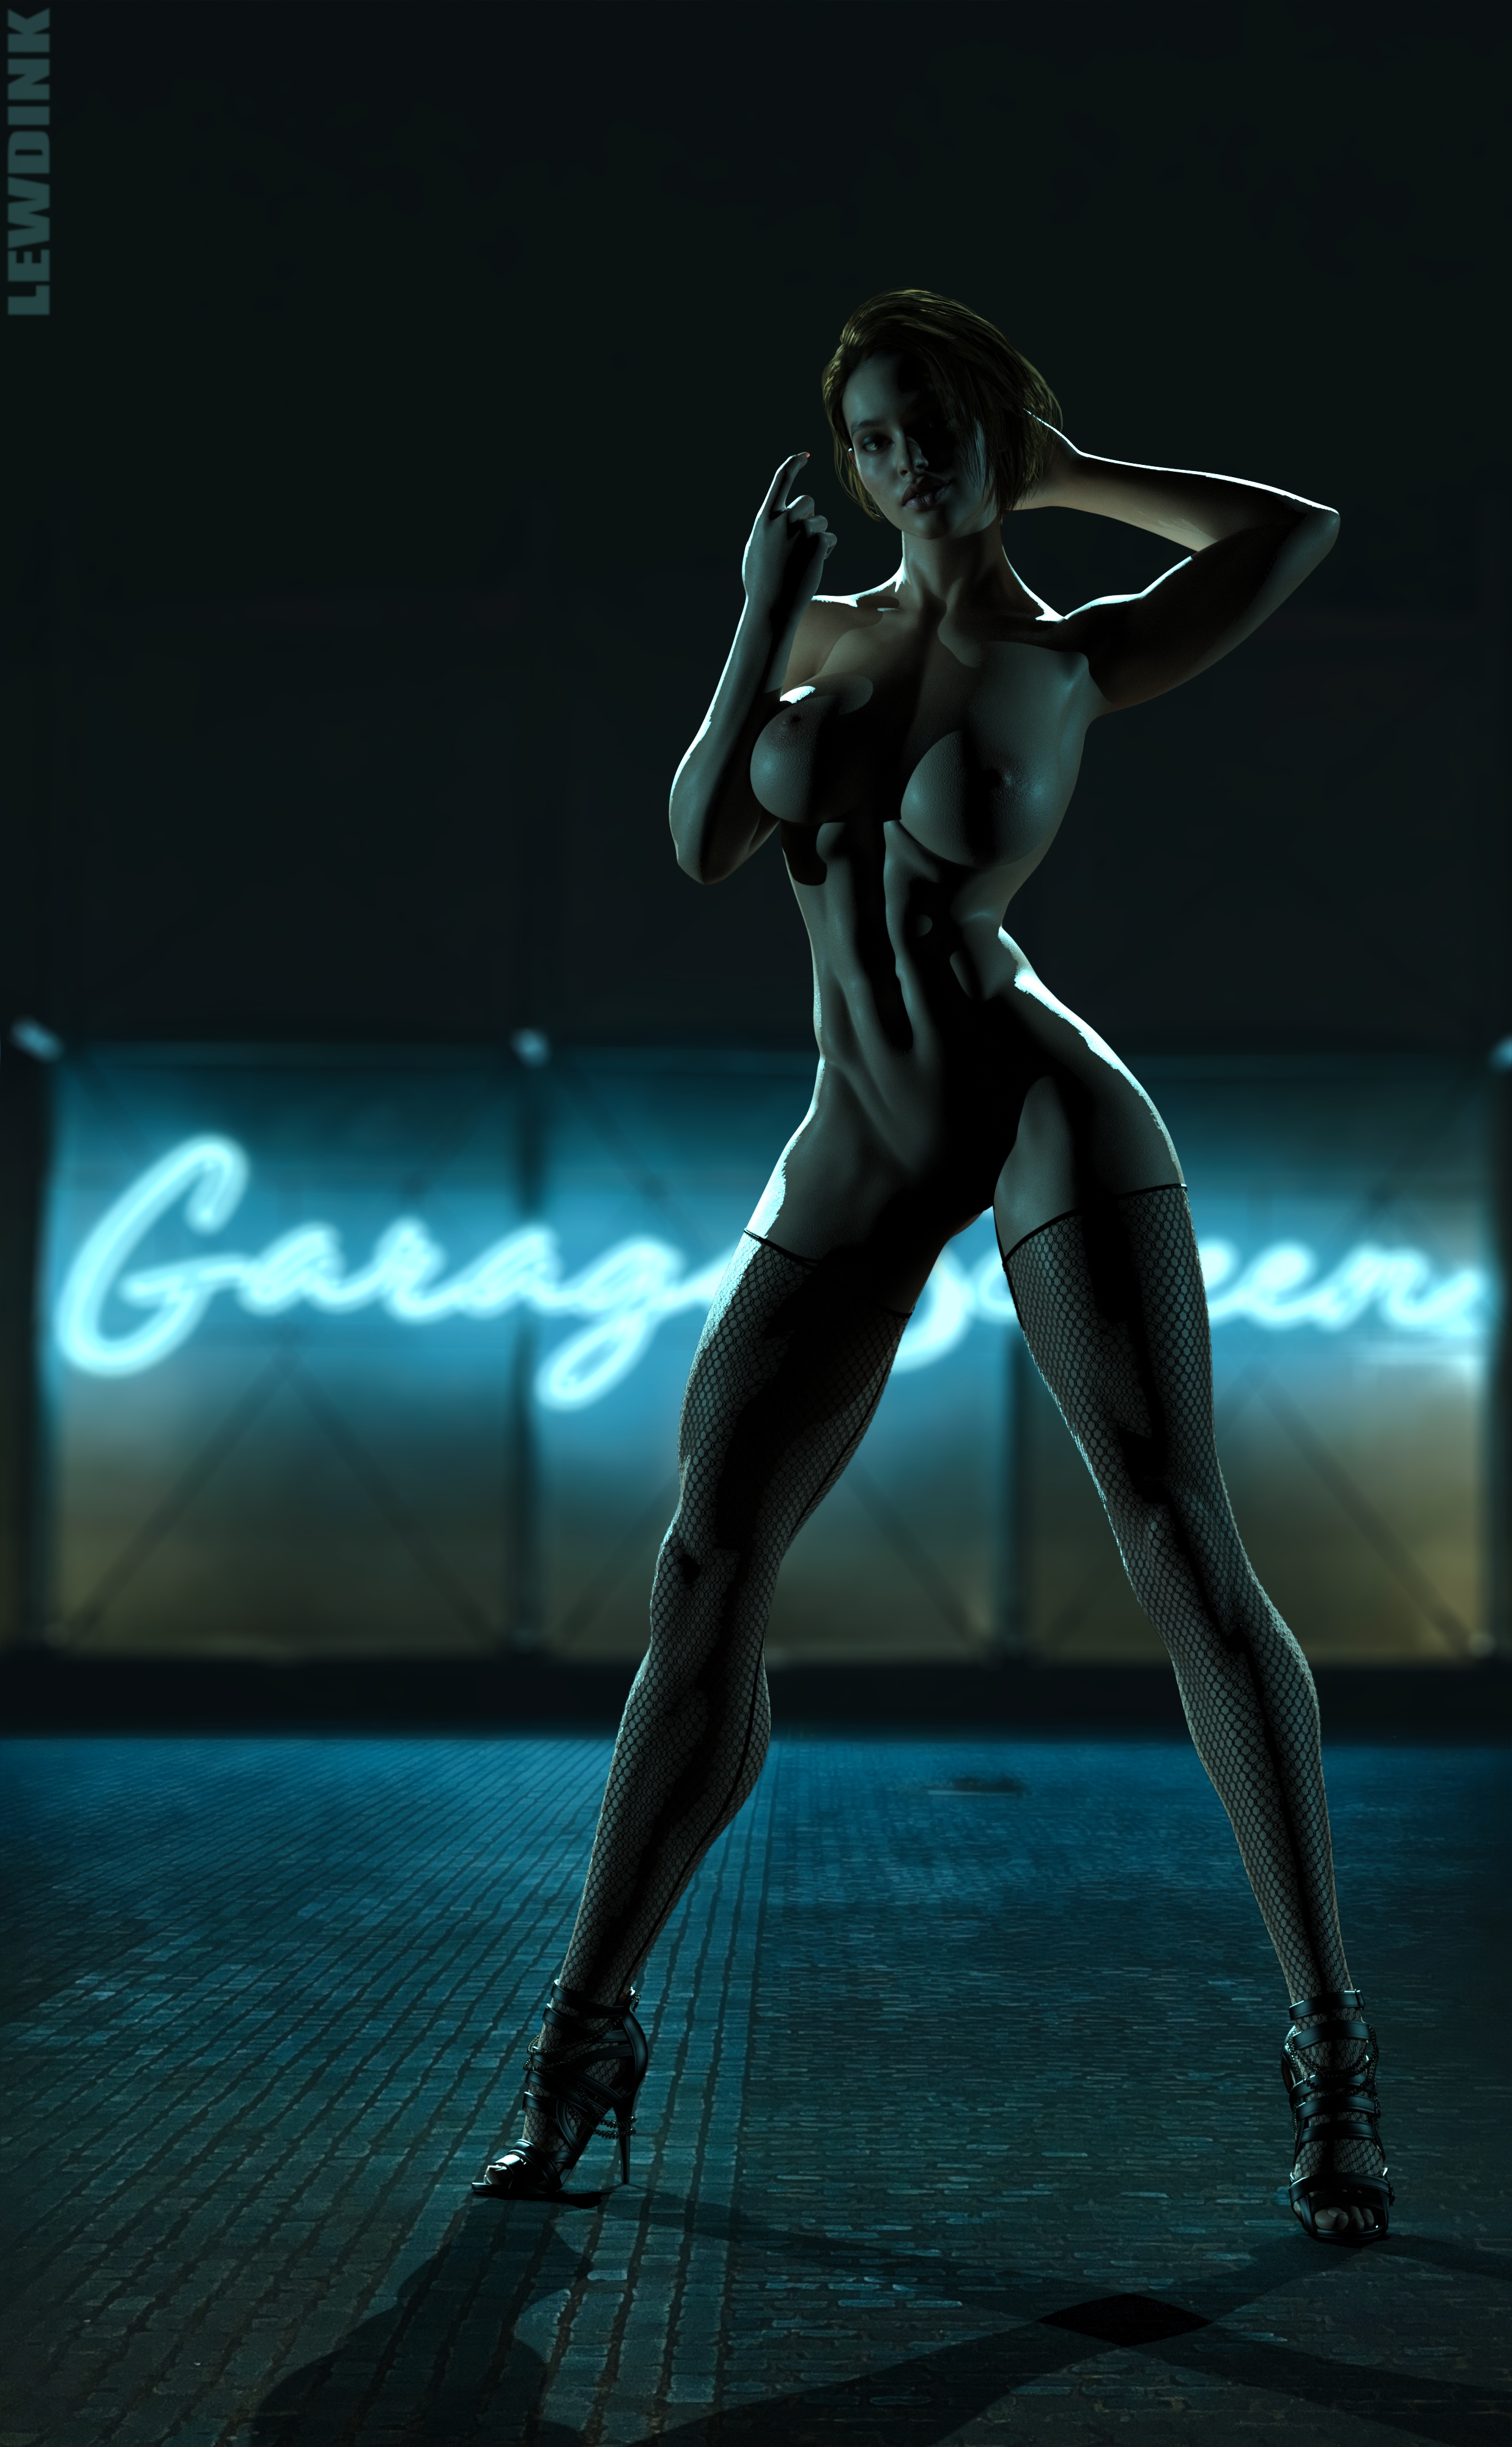 Street-tease Jill Valentine Resident Evil Resident Evil 2 Remake Resident Evil 3 Remake Muscular Girl 3d Porn 3d Girl 3dnsfw 3dxgirls Abs Brunette Sexy Hot Bimbo Muscles Musclegirl Pinup Perfect Body Nude Nudes Booty Amazon Position Police Outdoor Exhibitionism Short Hair Sexy Ass Sexyhot Sexy Woman Fit Fishnet Stockings